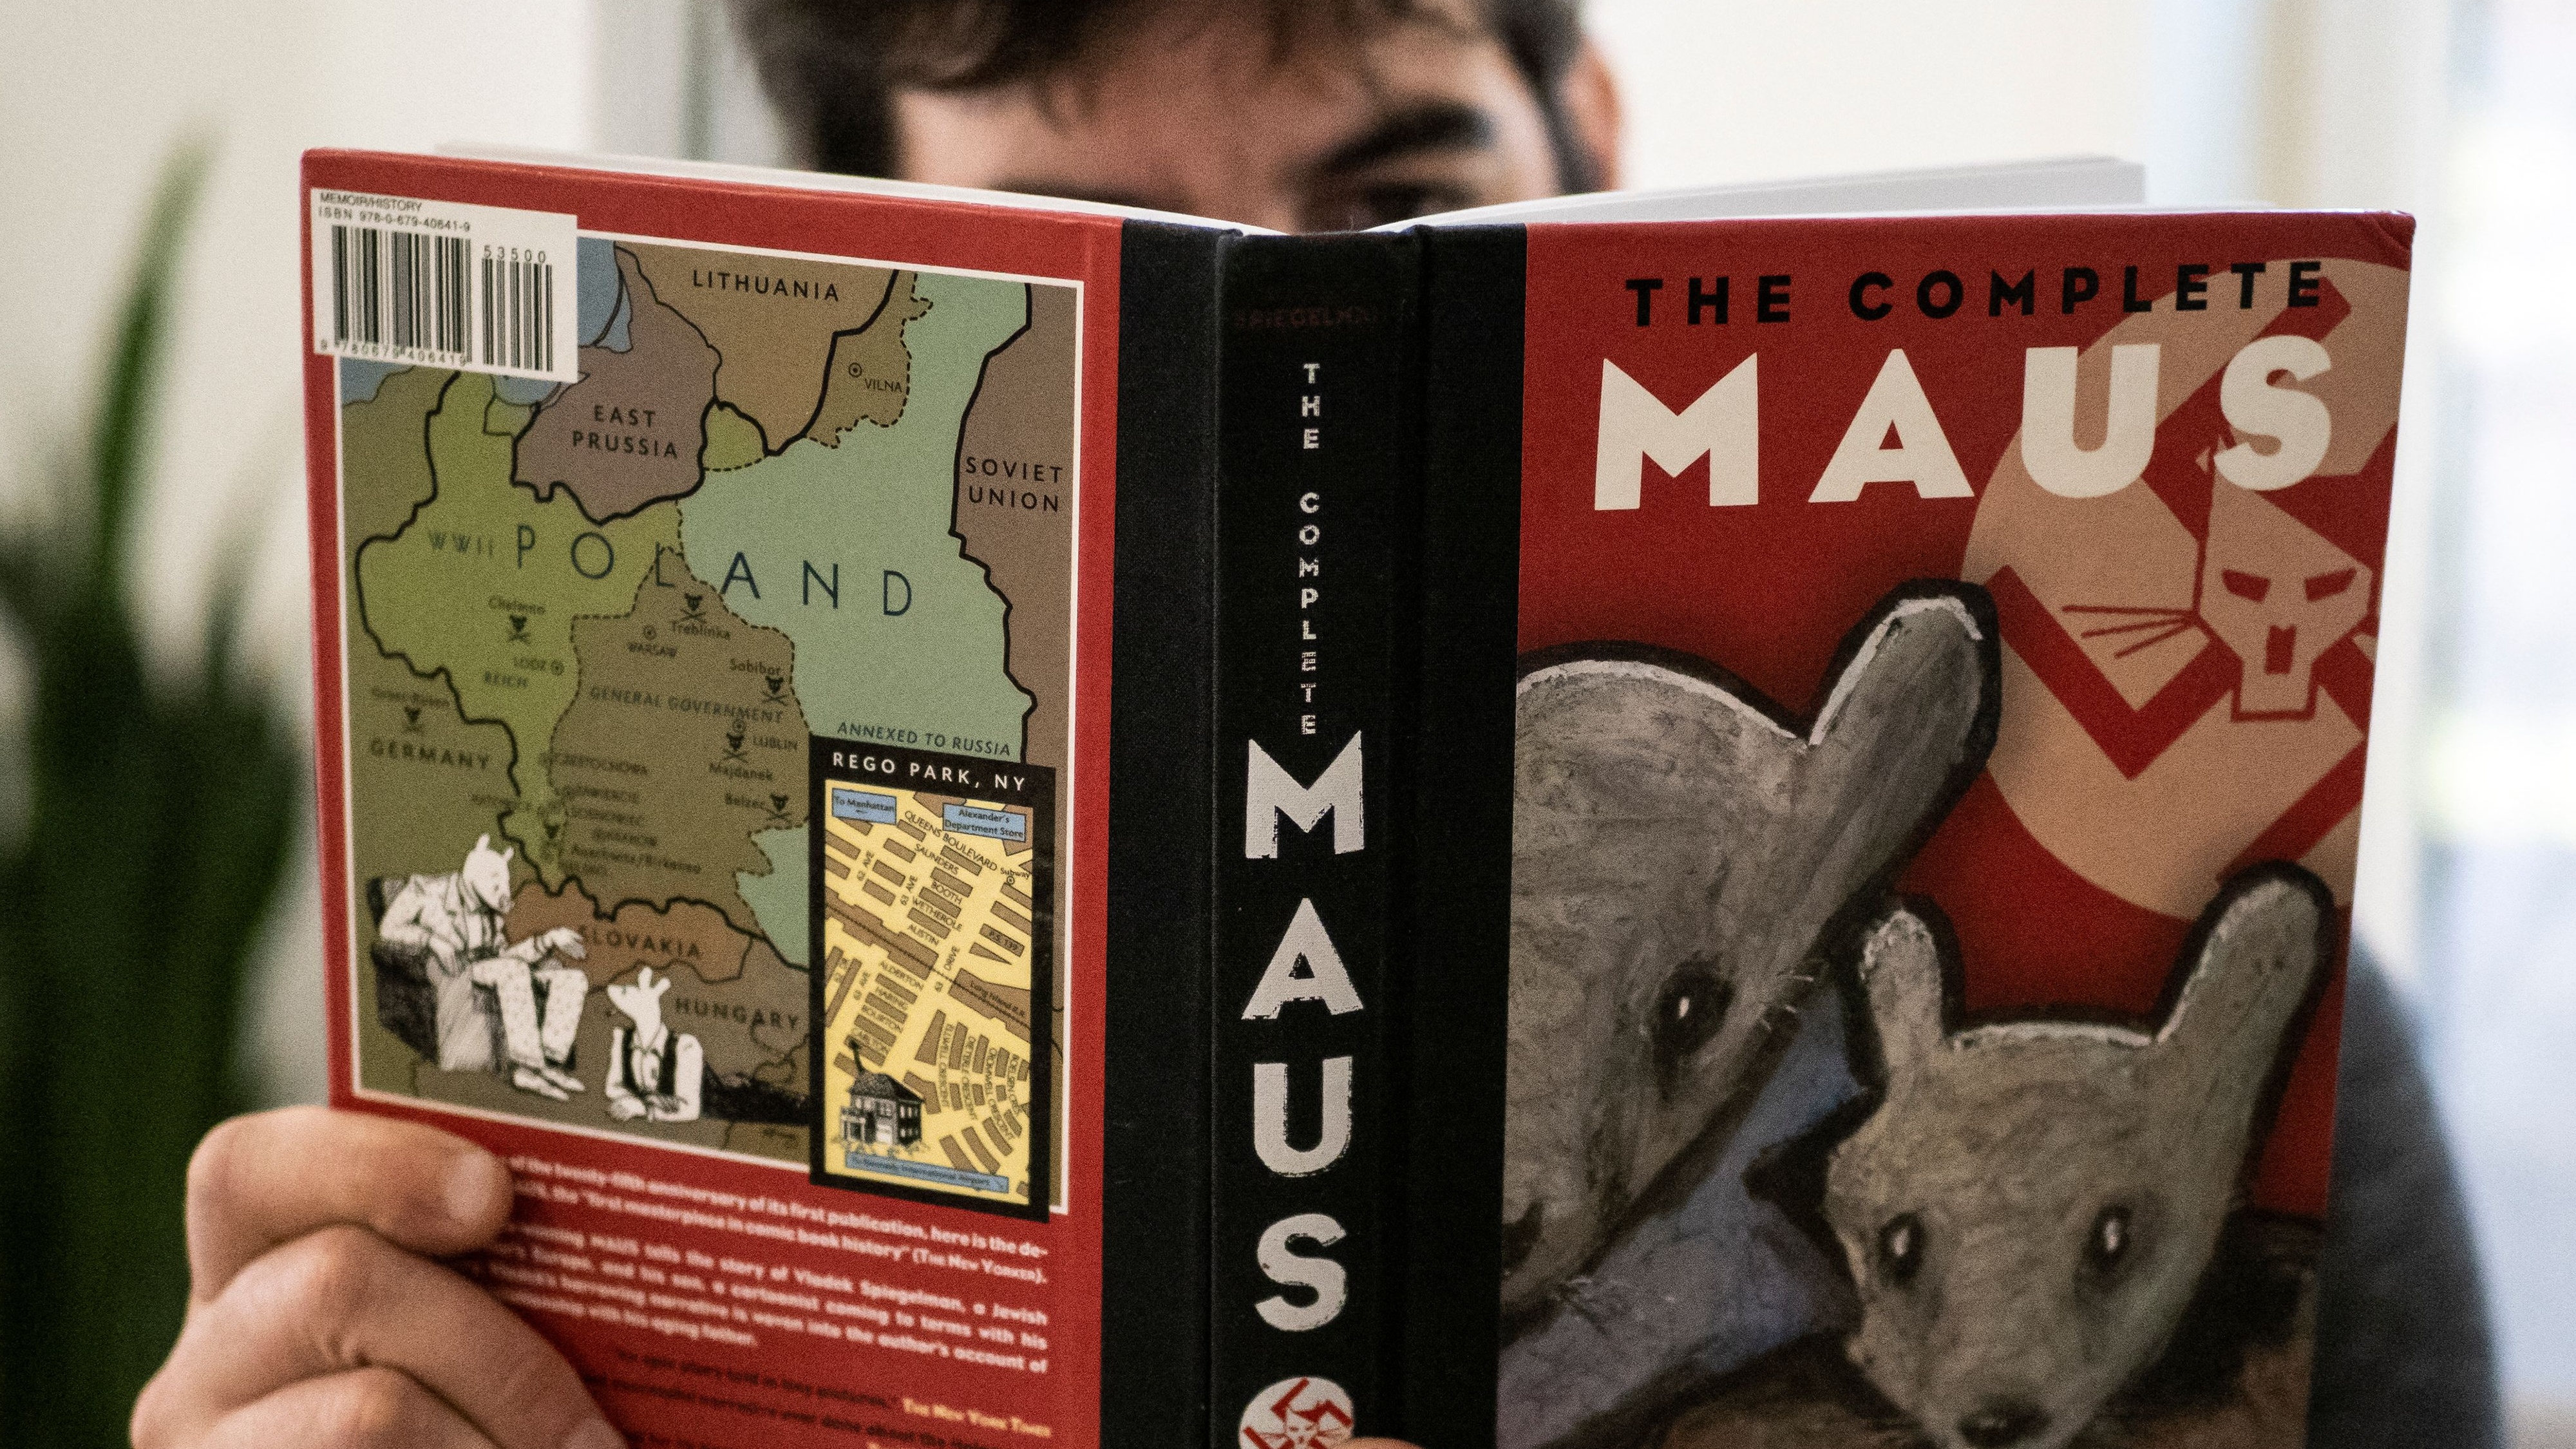 Books repeatedly targeted for bans include Holocaust graphic novel Maus by Art Spiegelman